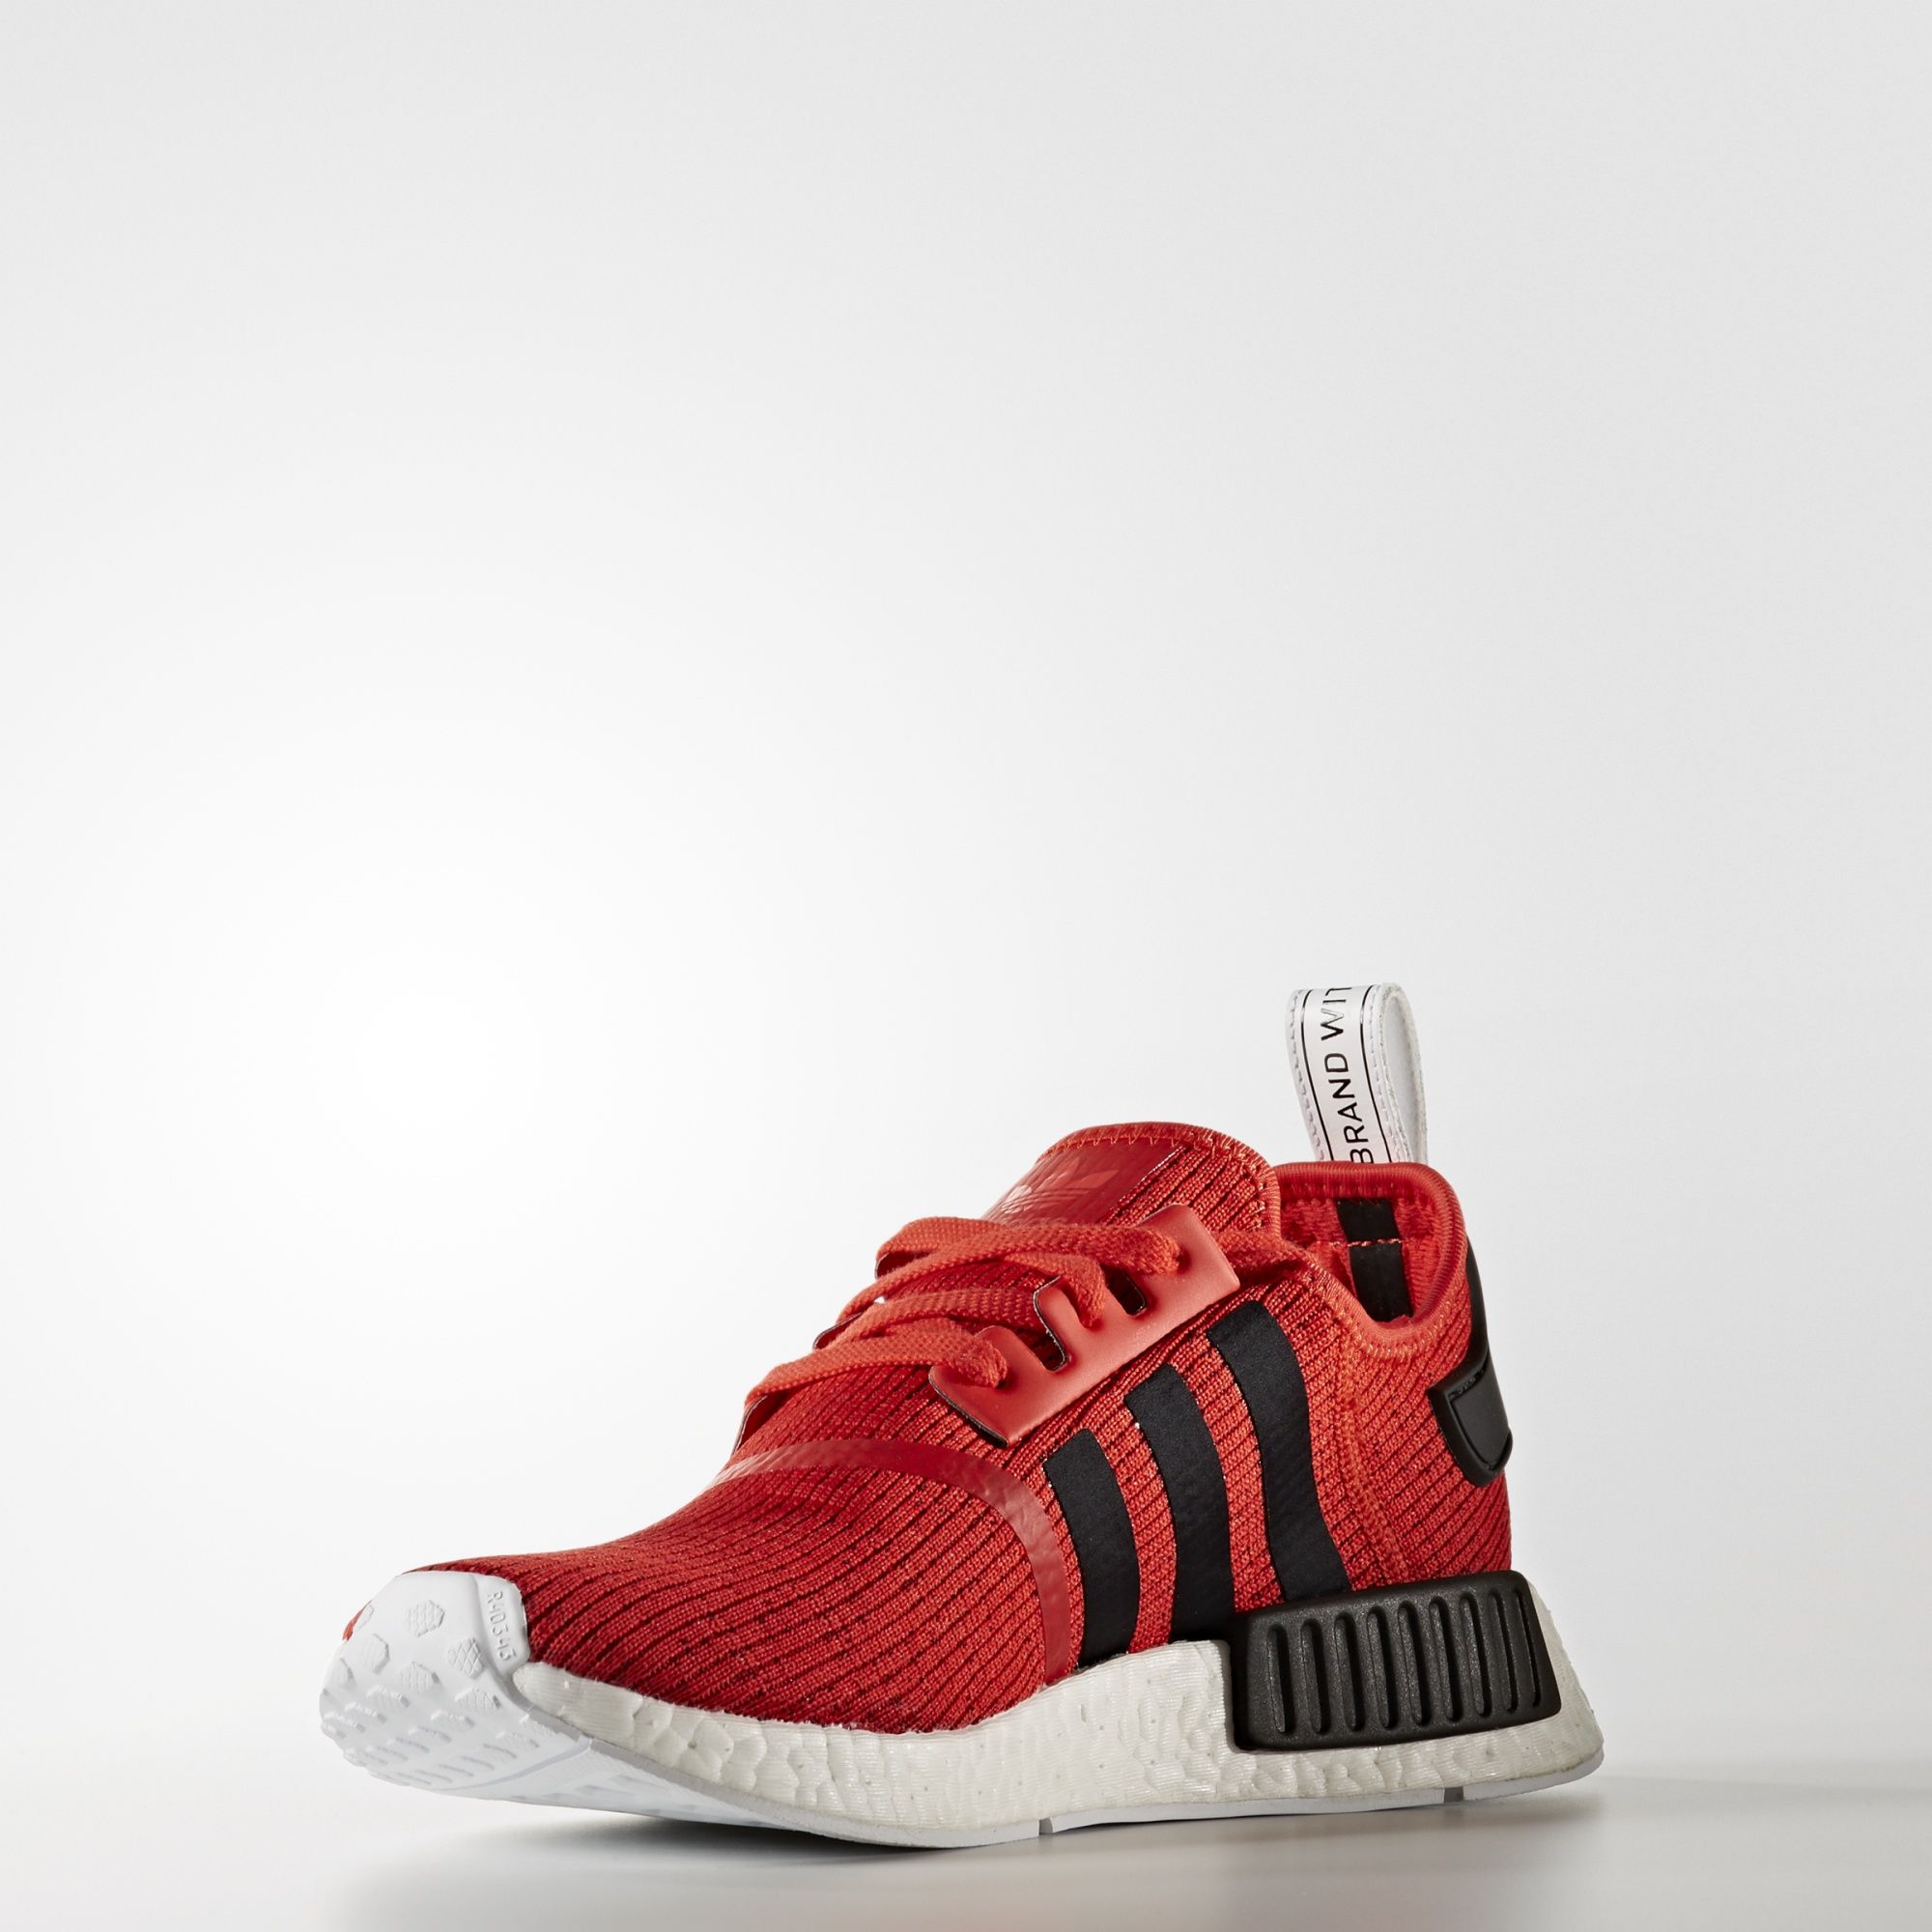 adidas-nmd_r1-core-red-black-3